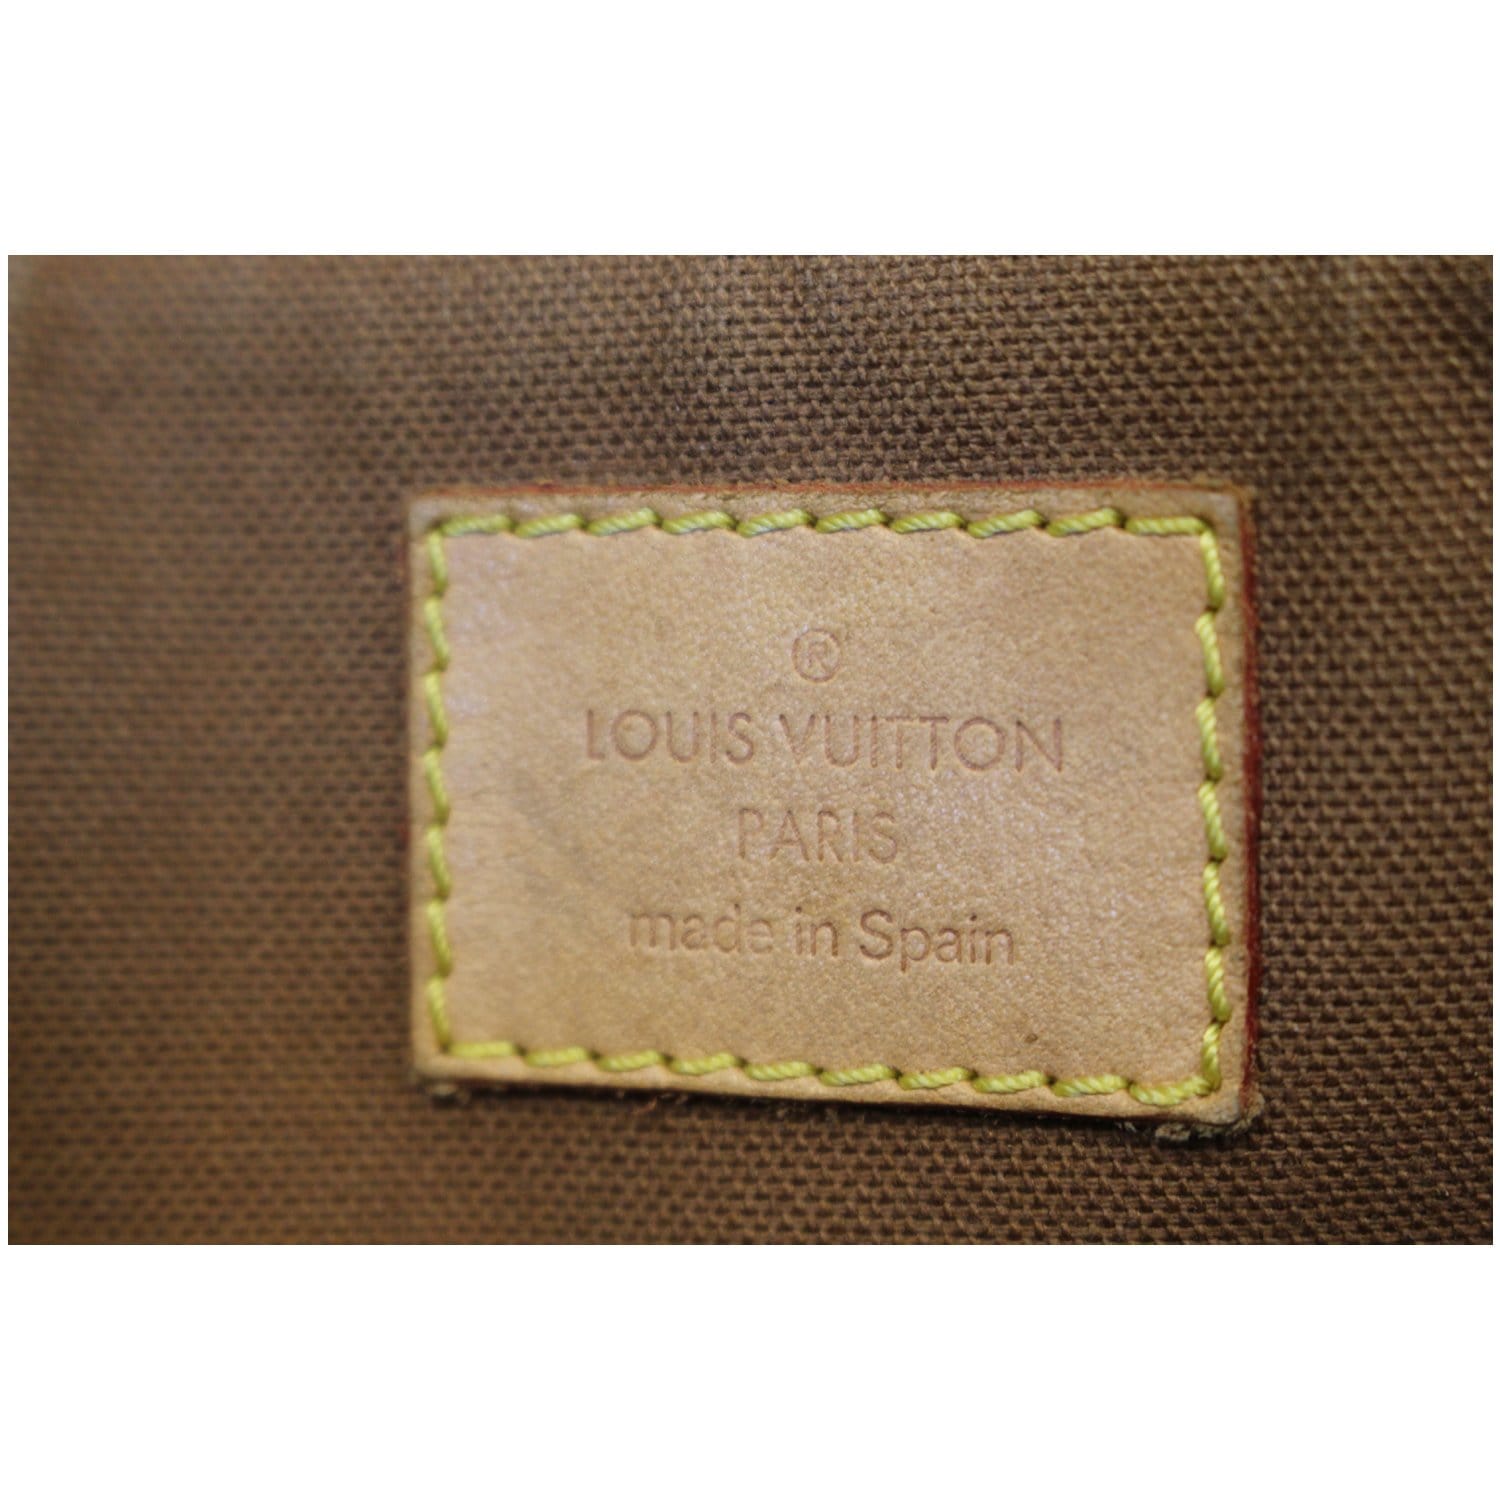 PRICE DROP ALERTAuthentic Louis Vuitton “Multipli Cite'” GM Shoulder Tote  for Sale in West Palm Beach, FL - OfferUp